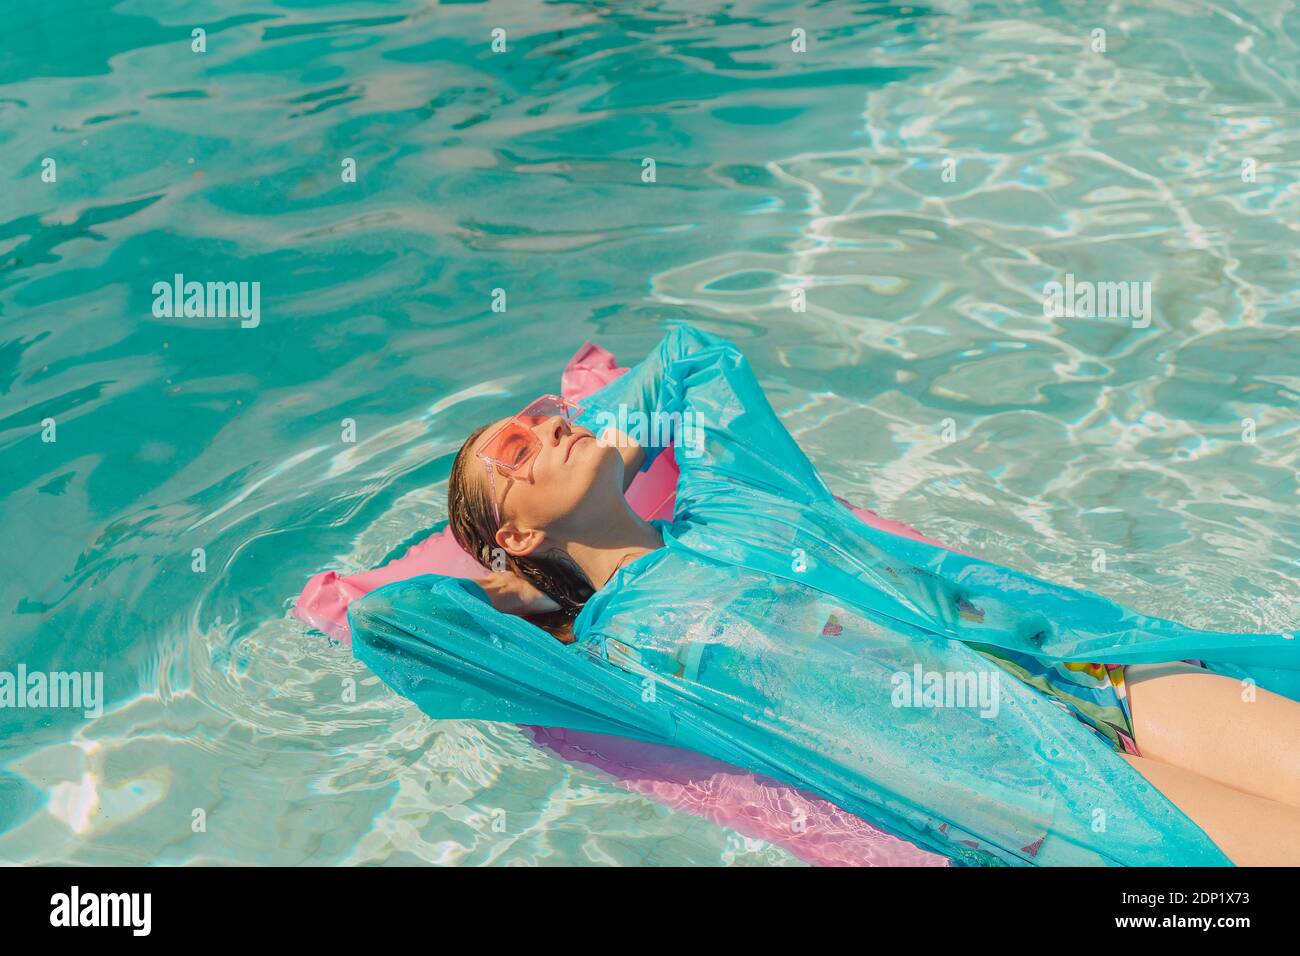 Woman wearing blue rain coat relaxing on pink airbed in swimming pool Stock Photo